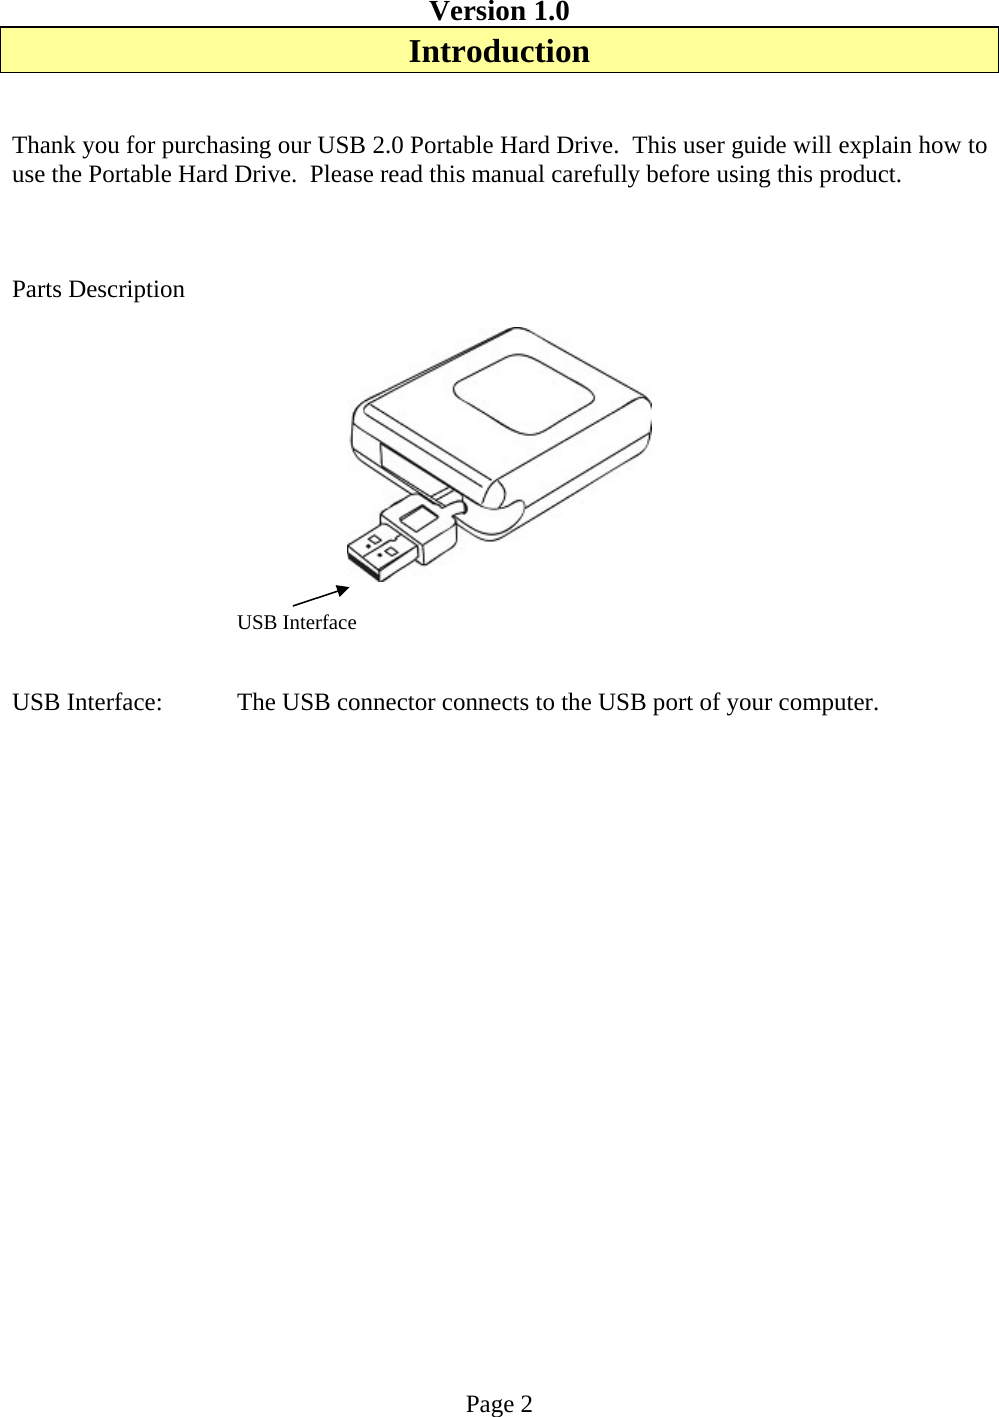 Version 1.0 Introduction   Thank you for purchasing our USB 2.0 Portable Hard Drive.  This user guide will explain how to use the Portable Hard Drive.  Please read this manual carefully before using this product.     Parts Description               USB Interface   USB Interface:  The USB connector connects to the USB port of your computer.                     Page 2 